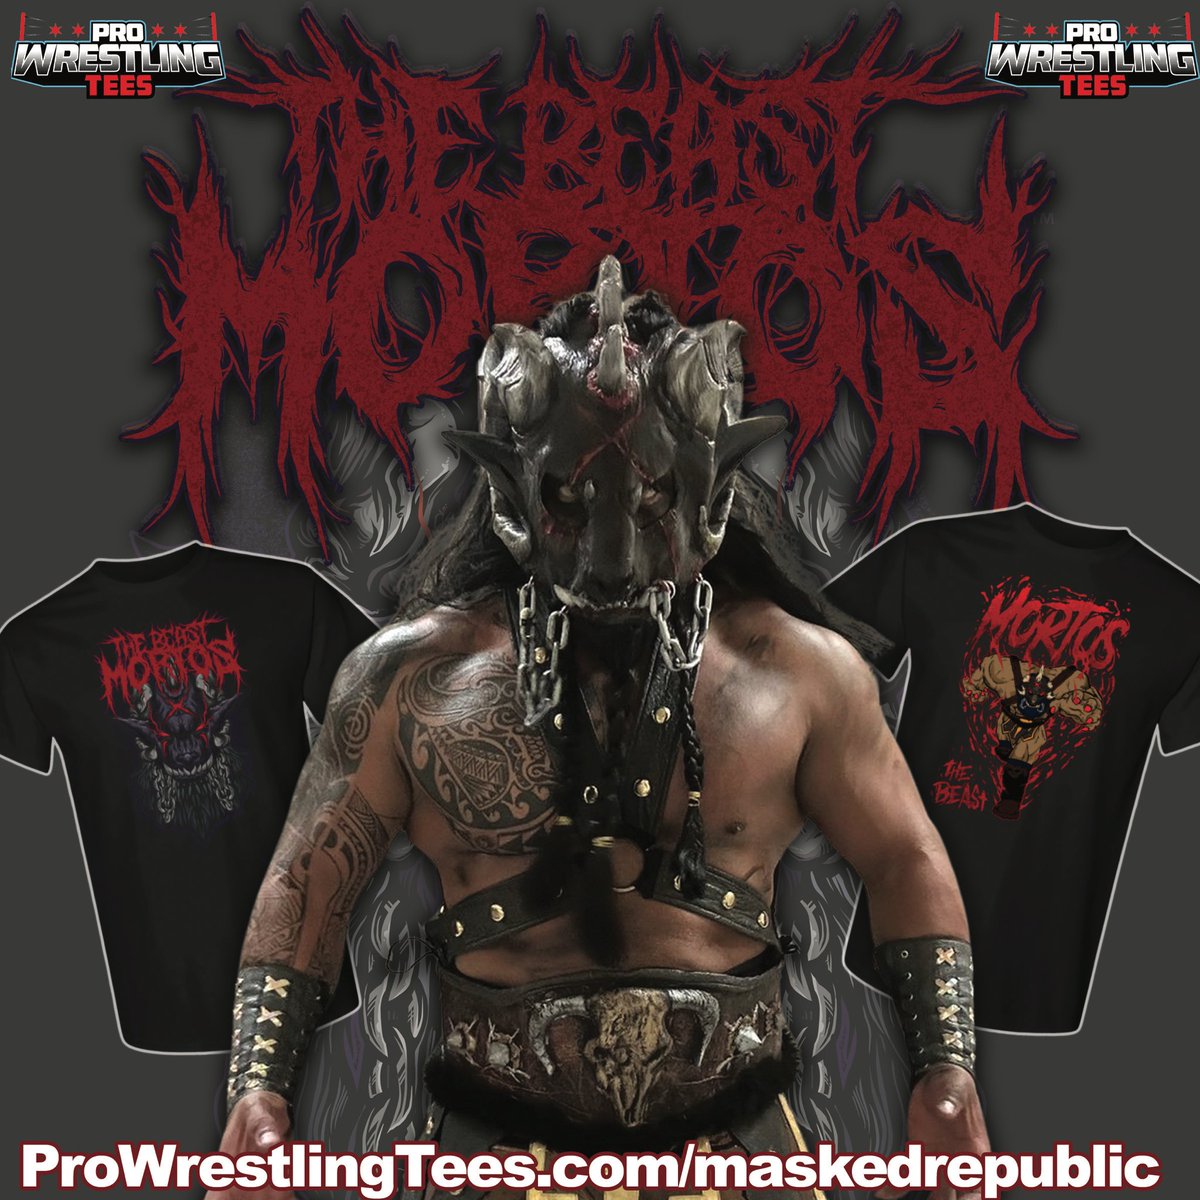 Debut The Beast Mortos tees now available at @PWTees in the Featured New Arrivals section of the home page. Great art by @ofthedead209 & Erik Jam.